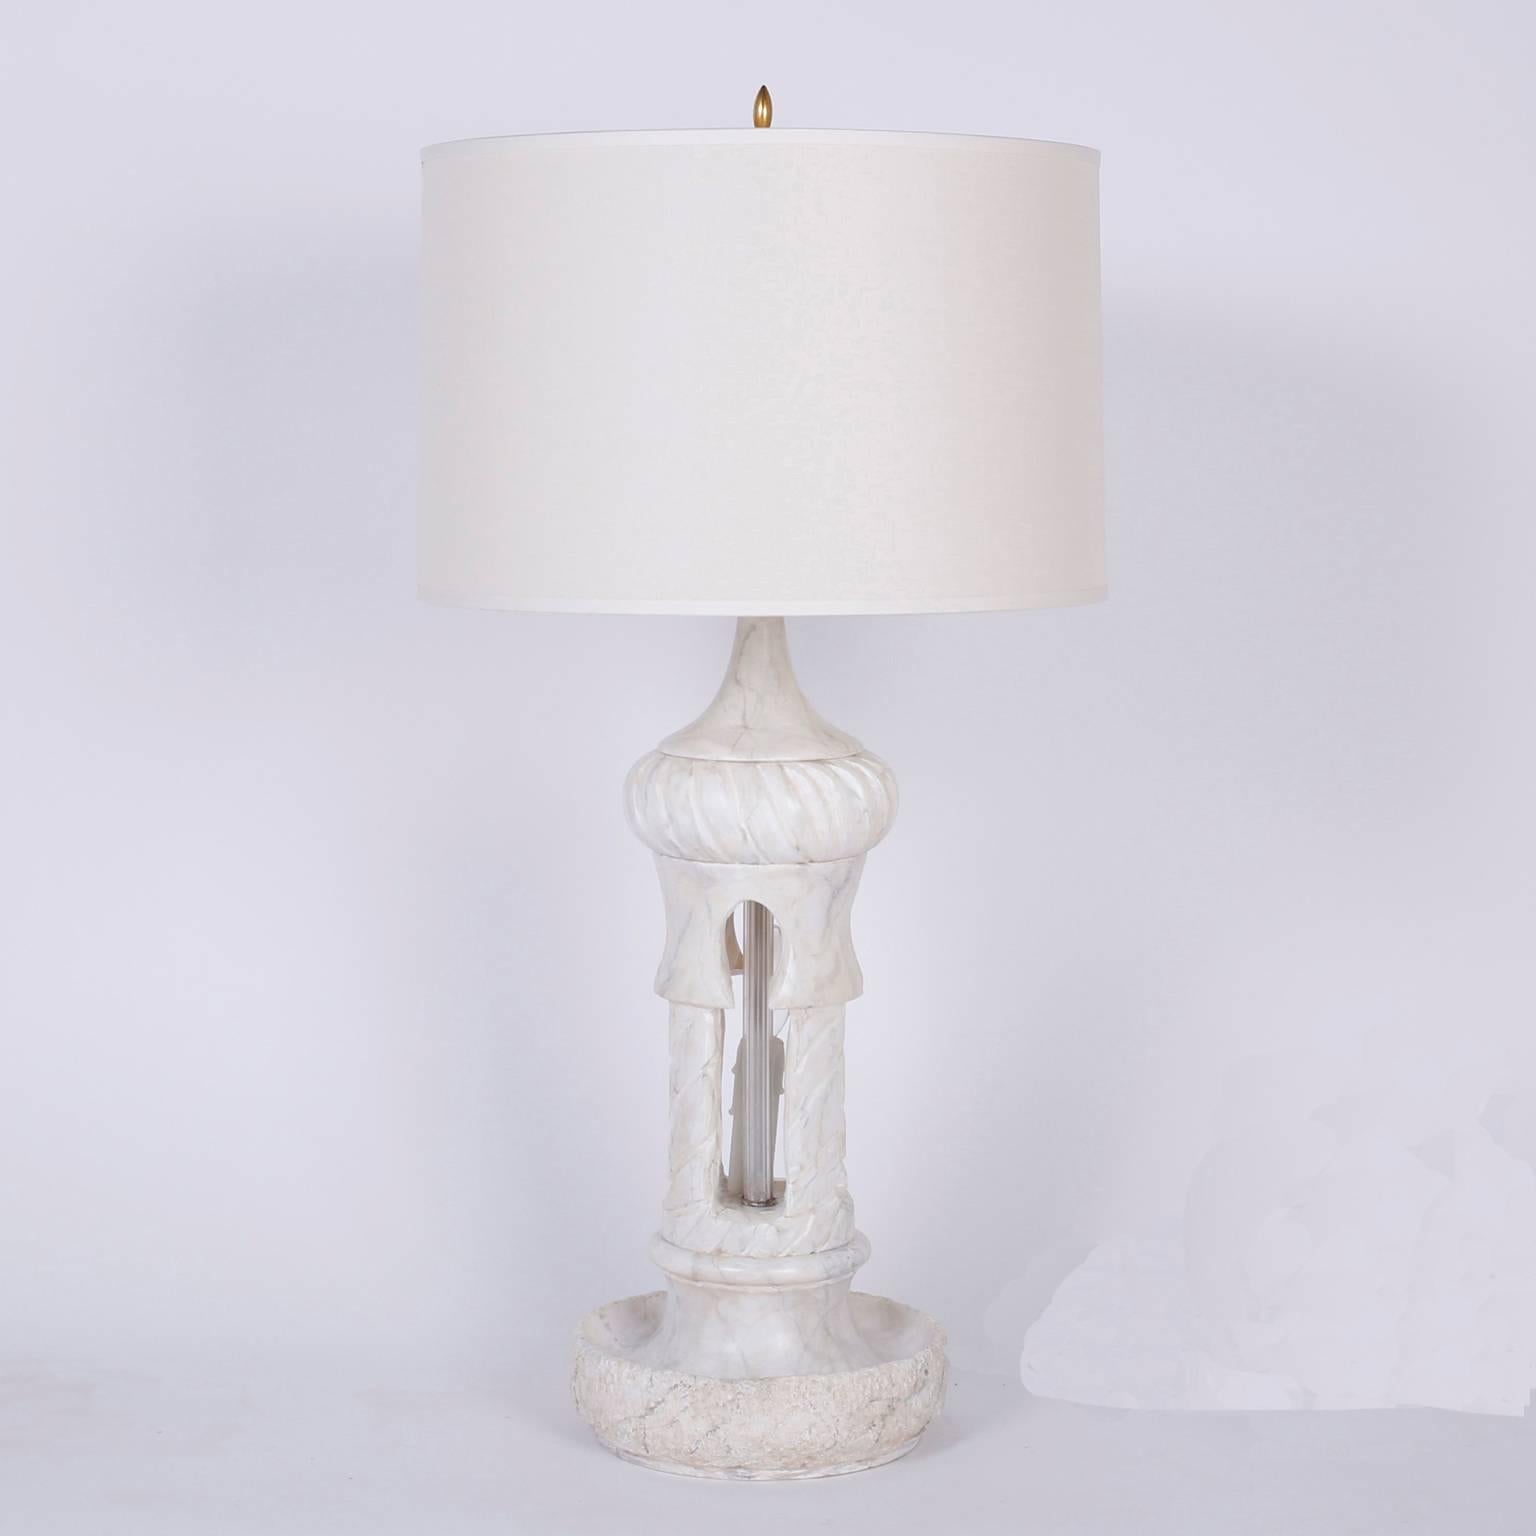 Pair of alabaster table lamps carved into Moorish architecture with domes and arches. Featuring candelabra mood lighting inside the dome. Newly wired.